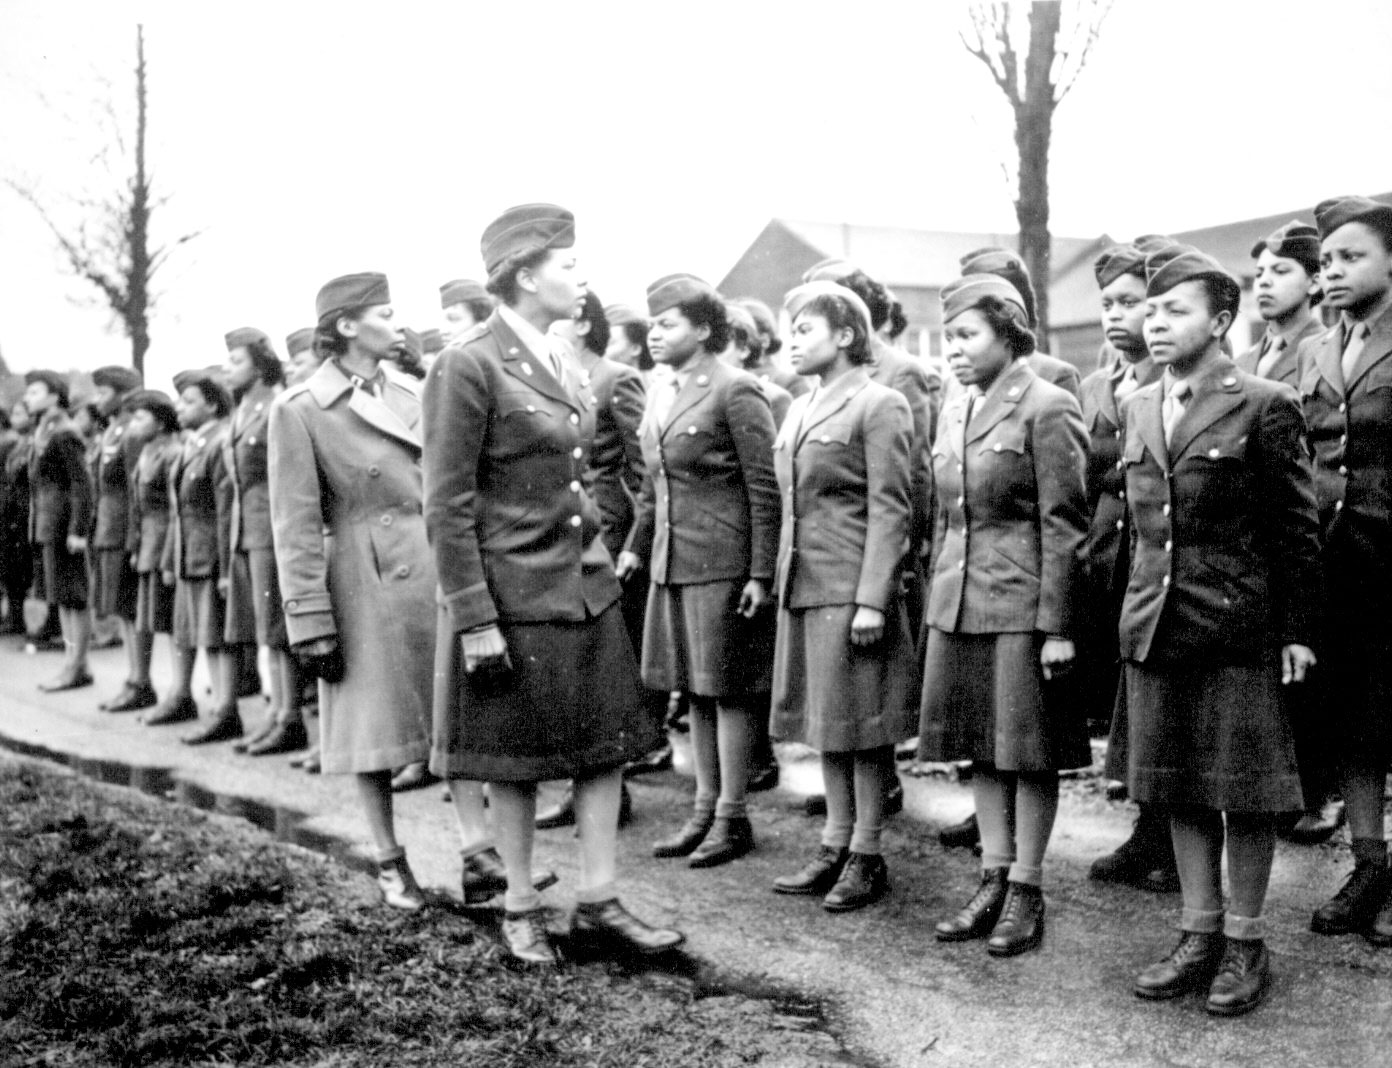 Somewhere in England, Major Charity E. Adams and Capt. Abbie N. Campbell inspect the first contingent of African-America members of the Women’s Army Corps assigned to overseas service. Photo by anonymous (15 February 1945). National Archives and Records Administration. PD-U.S. Government. Wikimedia Commons.